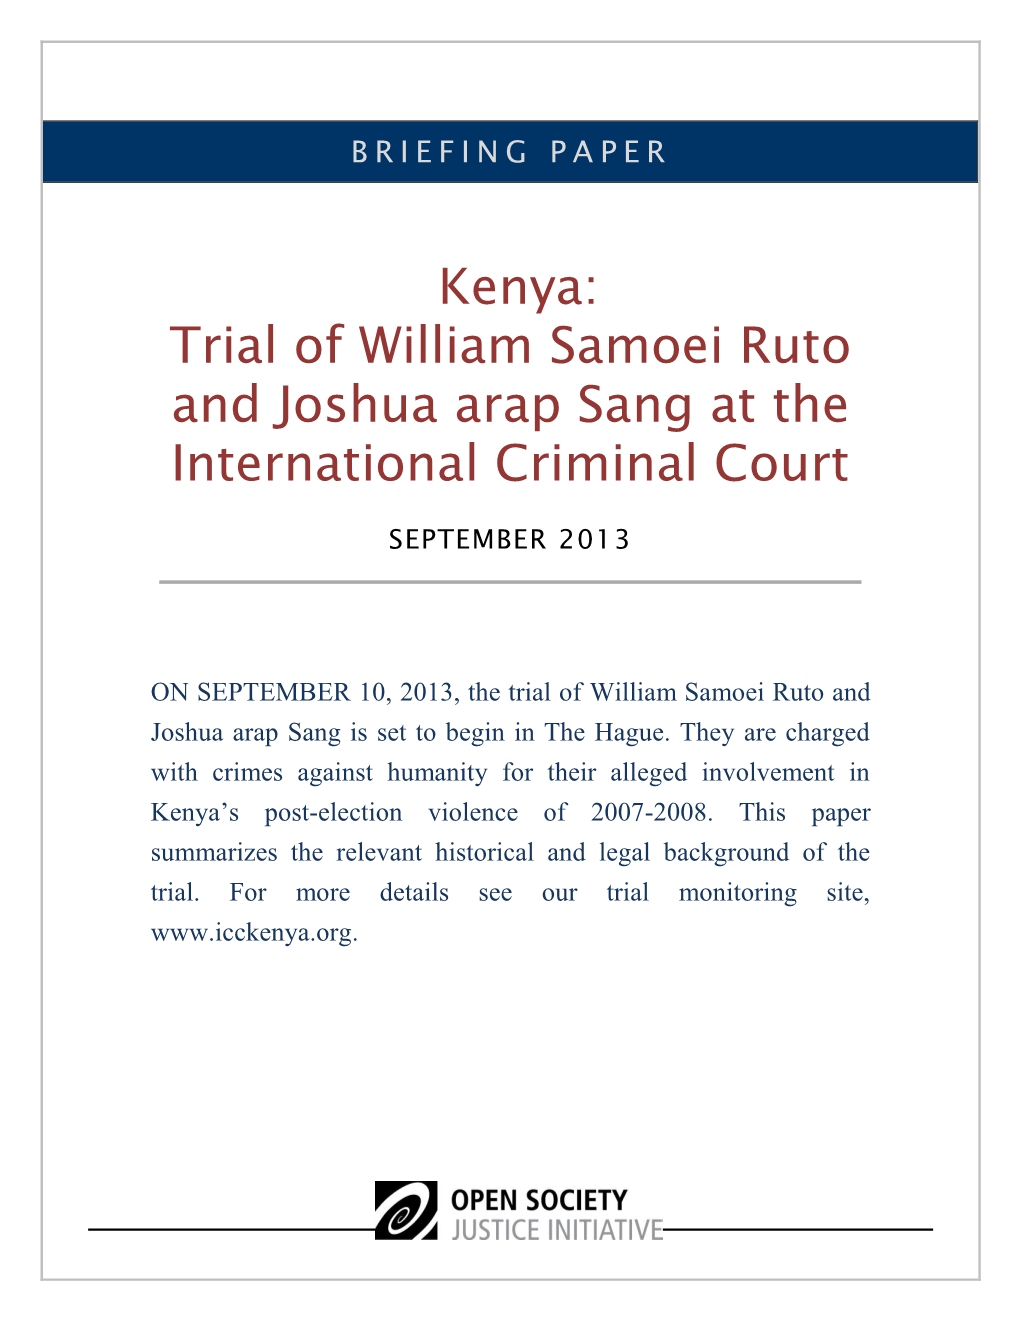 Trial of William Samoei Ruto and Joshua Arap Sang at the International Criminal Court